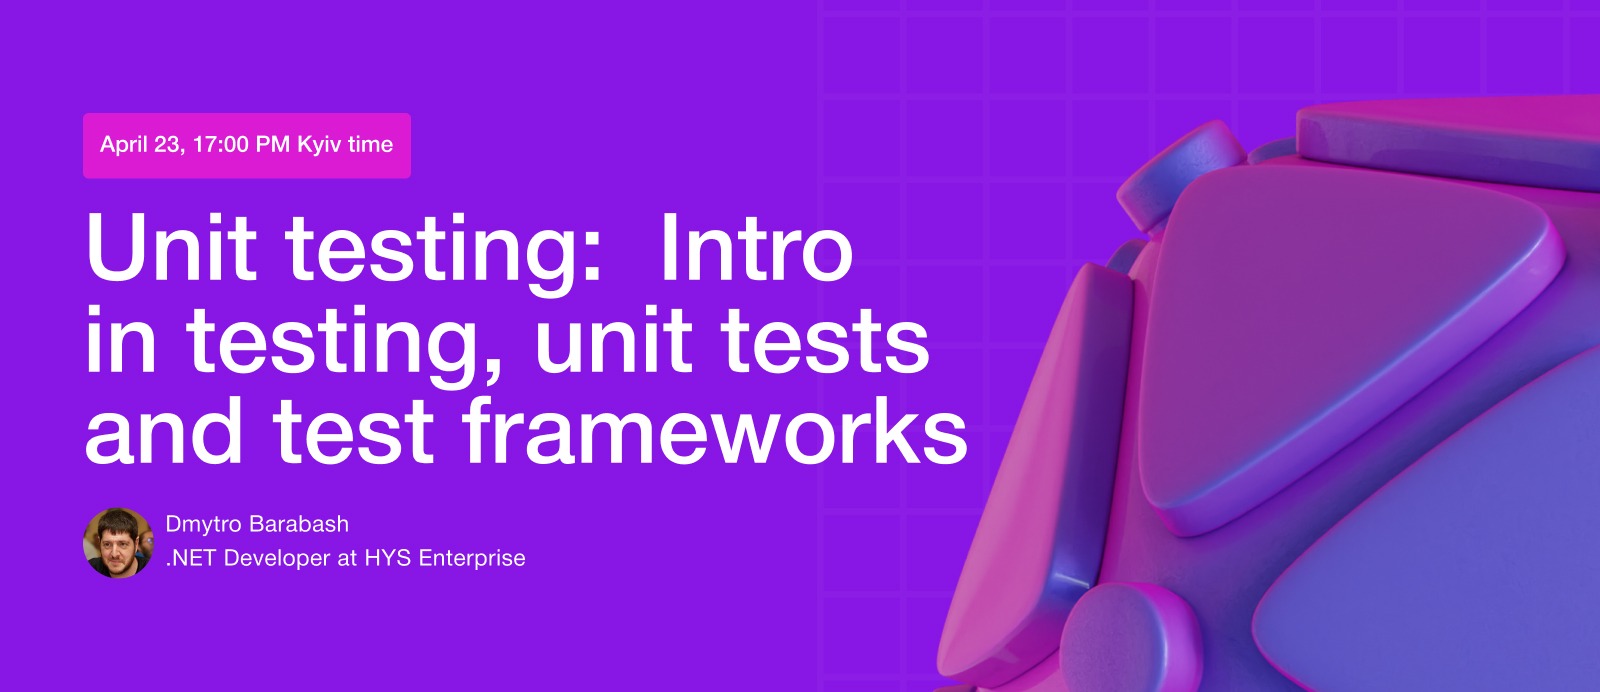 Unit testing: Intro in testing, unit tests and test frameworks